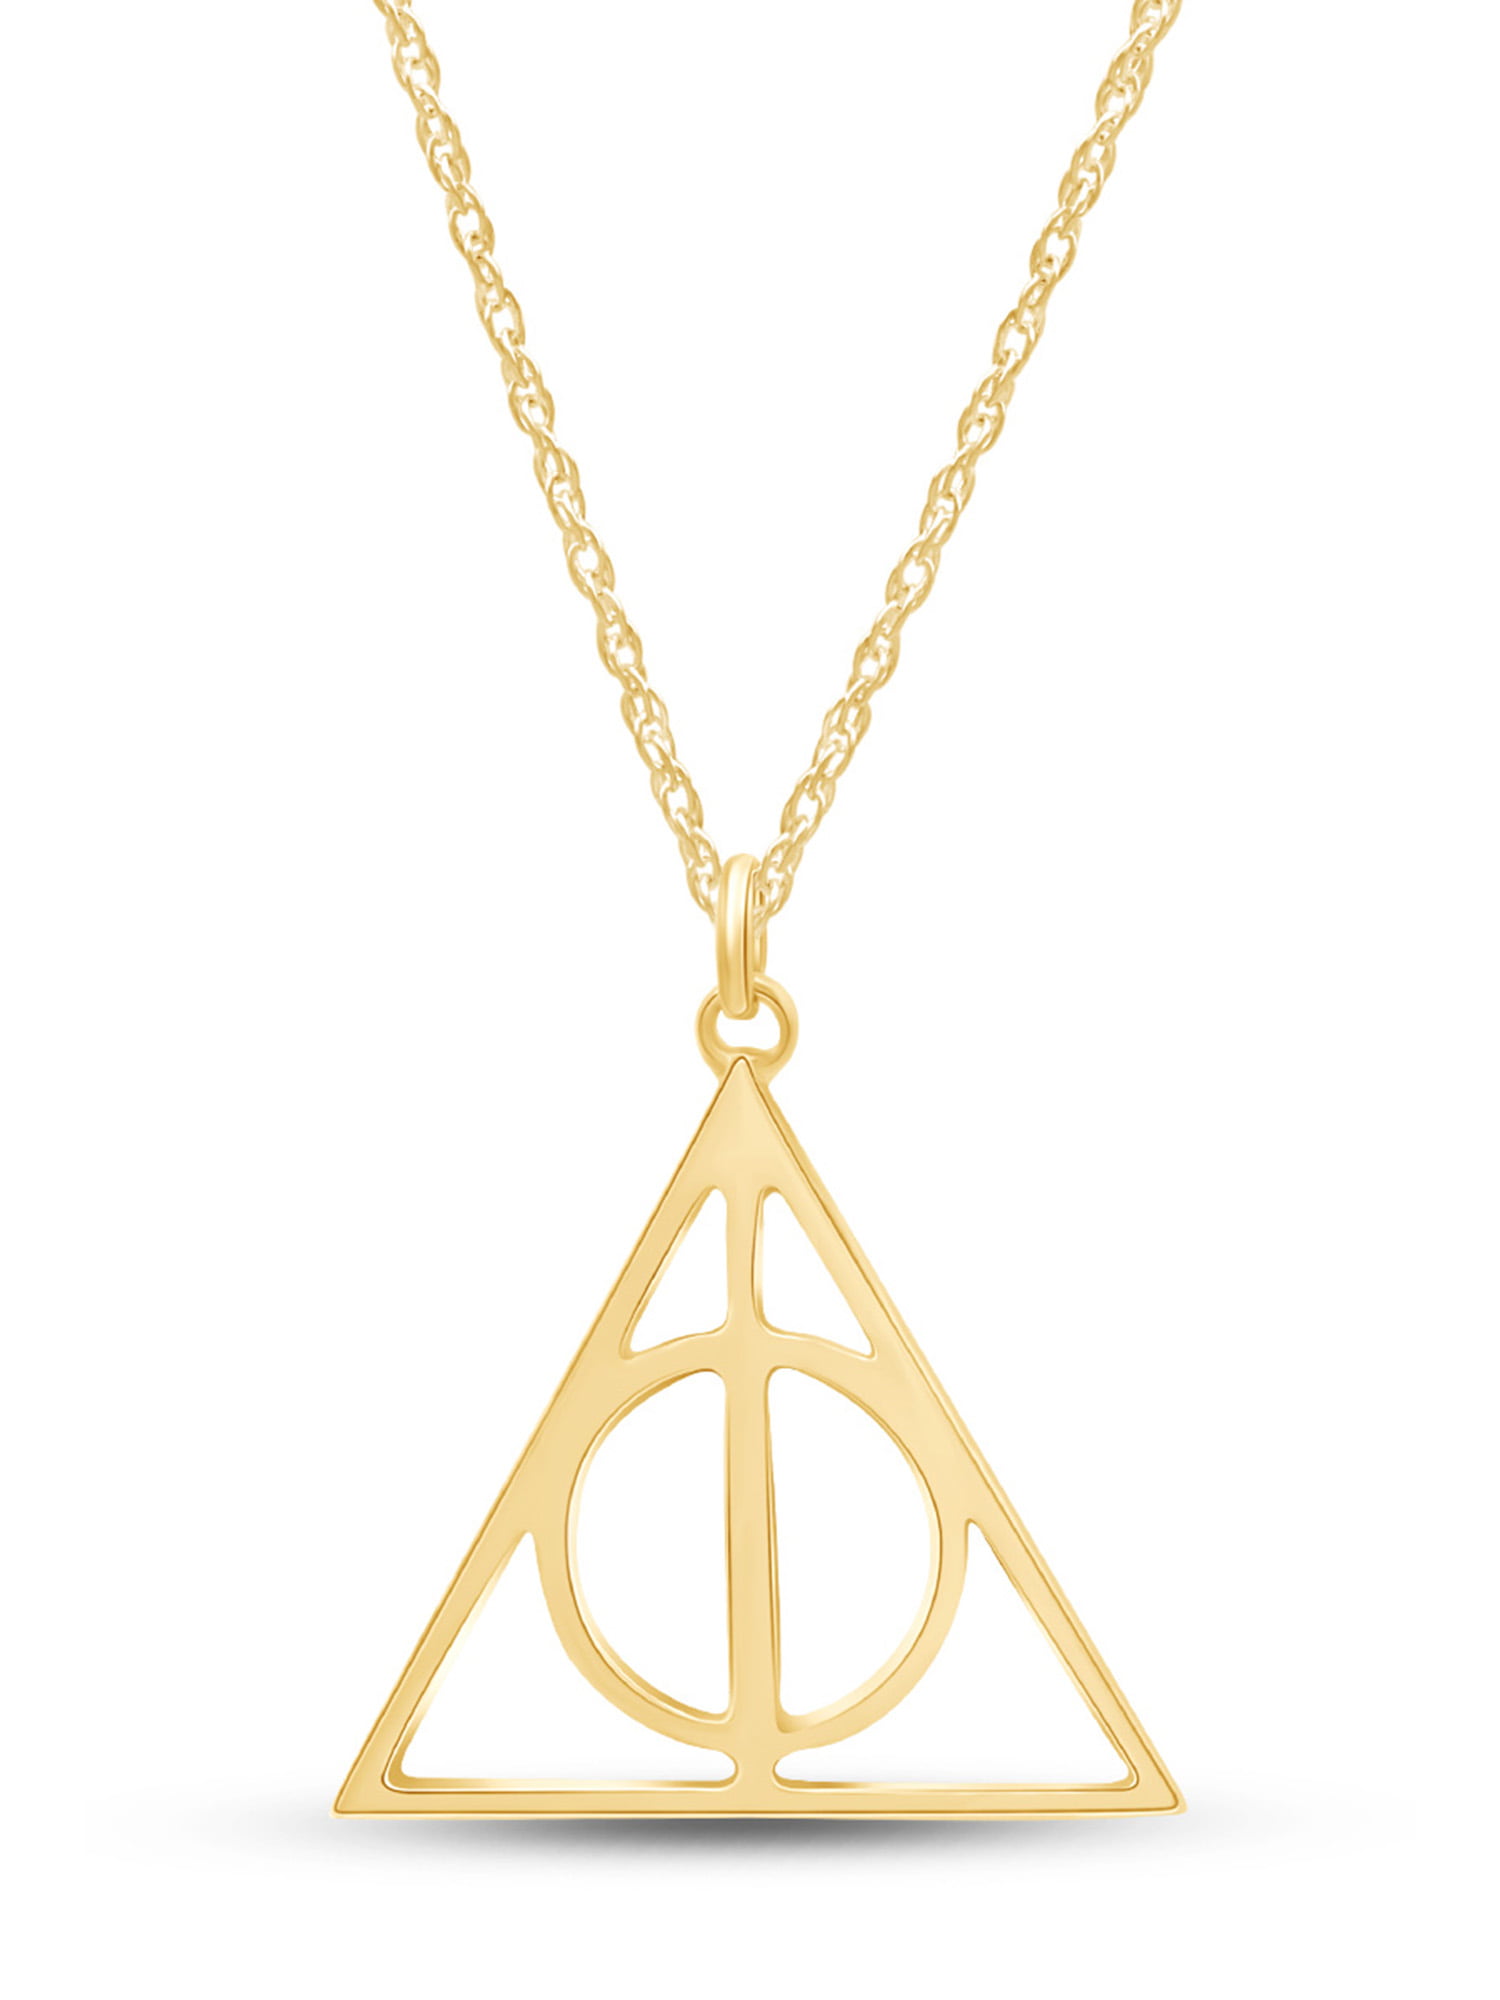 Movie Harry Potter Deathly Hallows Stone Silver Pendant Necklace with Gift Bag 